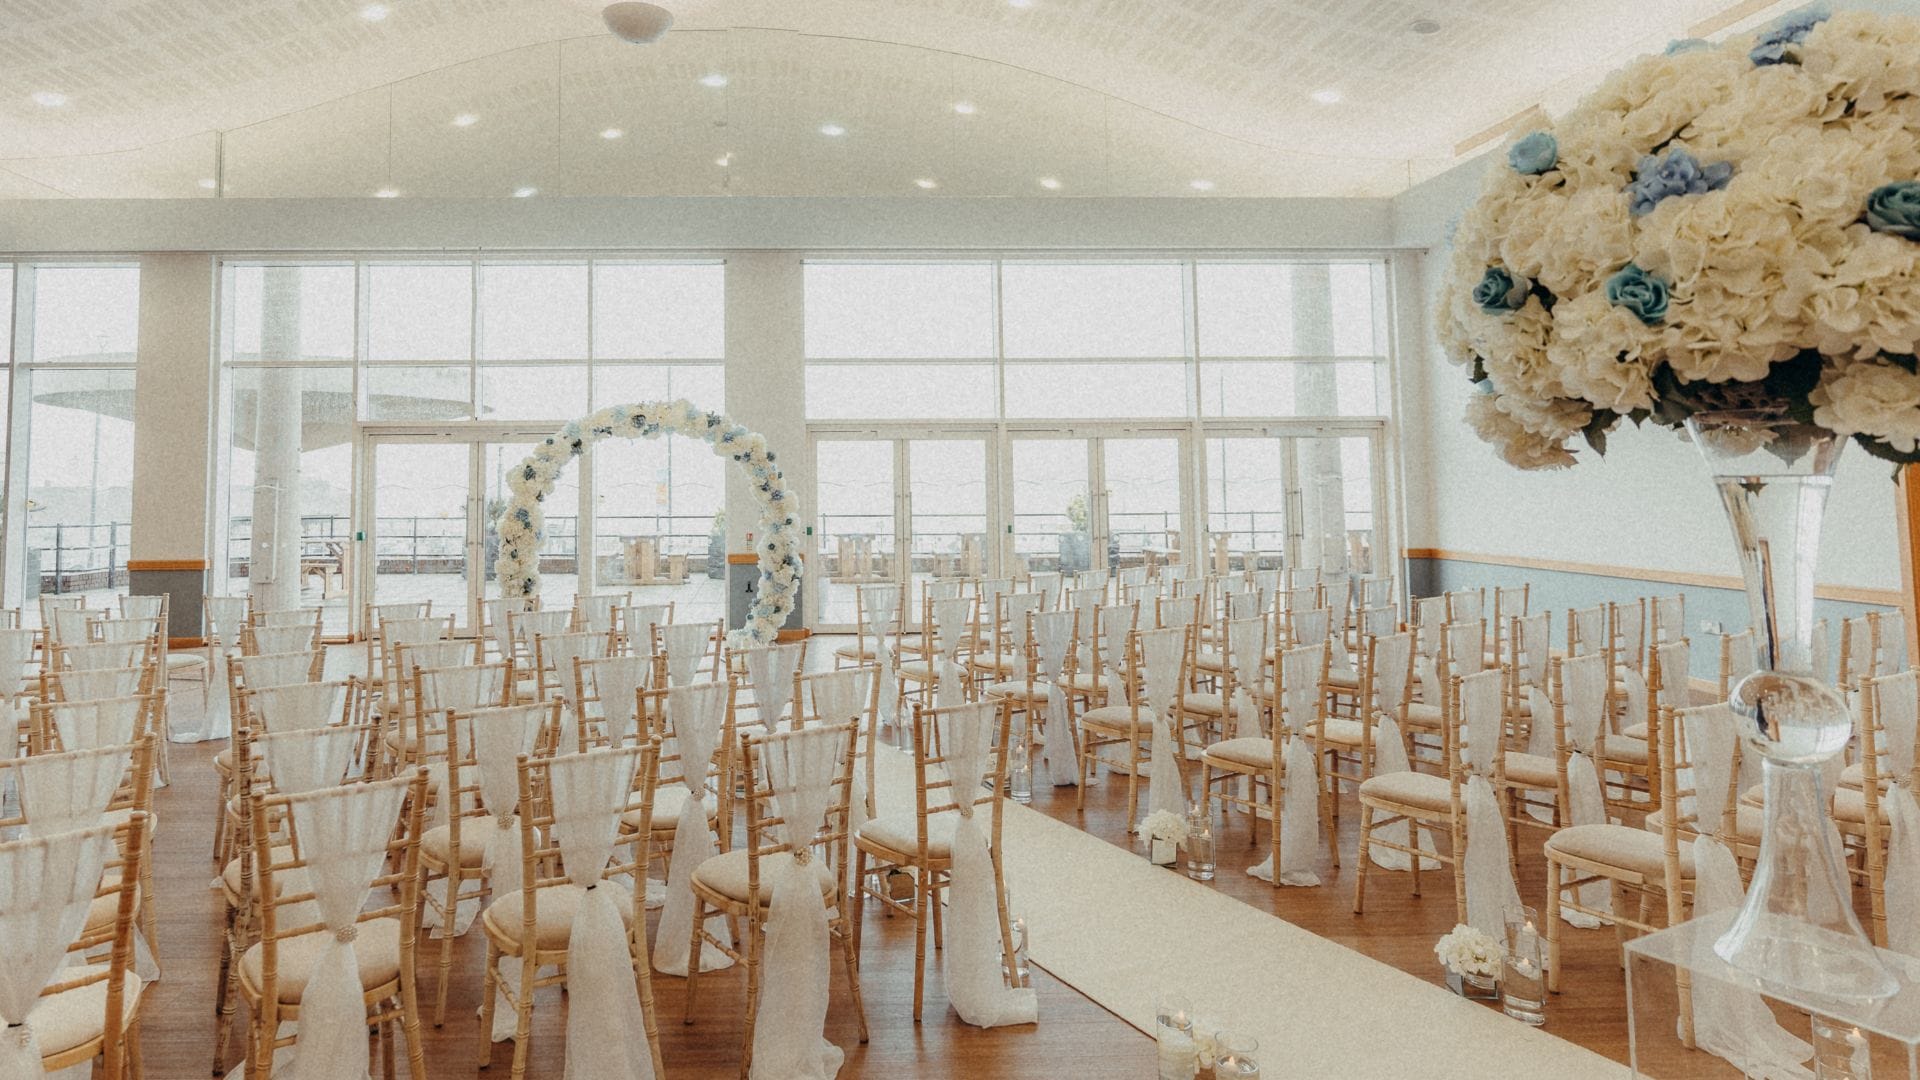 Winter Garden Suite set for a wedding ceremony. Chiavari chairs with white linens and white/blue florals.